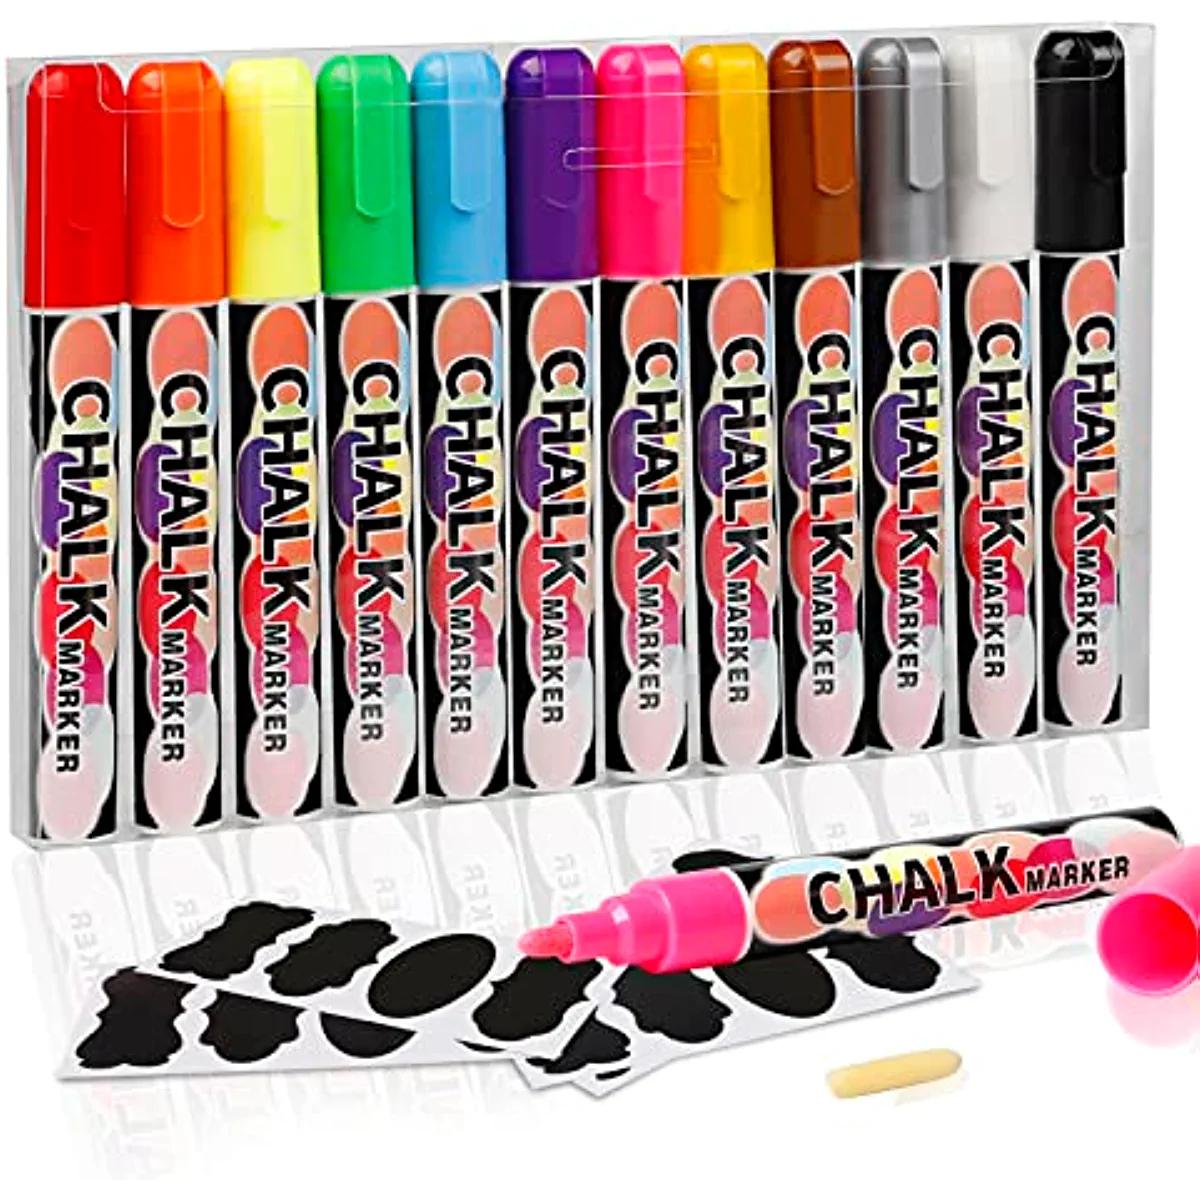 Liquid Chalk Markers, 30 Colors Premium Window Chalkboard Neon Pens,  Including 4 Metallic Colors, Painting and Drawing for Kids and Adults,  Bistro & Restaurant, Wet Erase - Reversible Tip